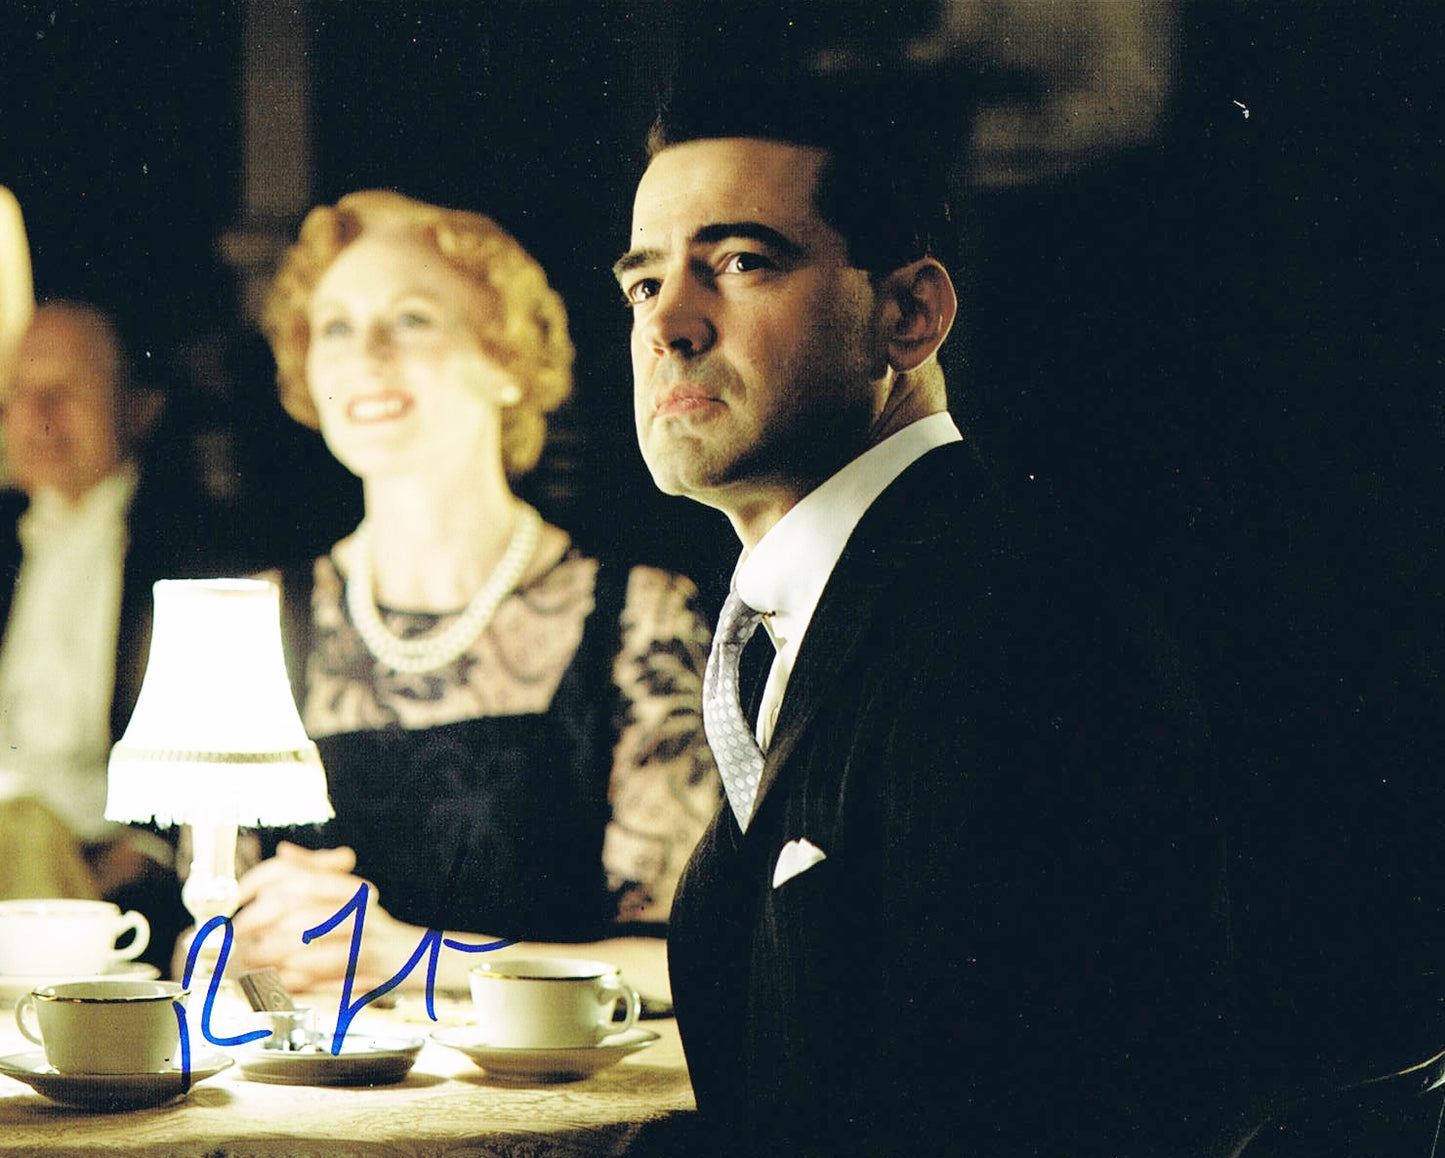 Ron Livingston Signed 8x10 Photo - Video Proof